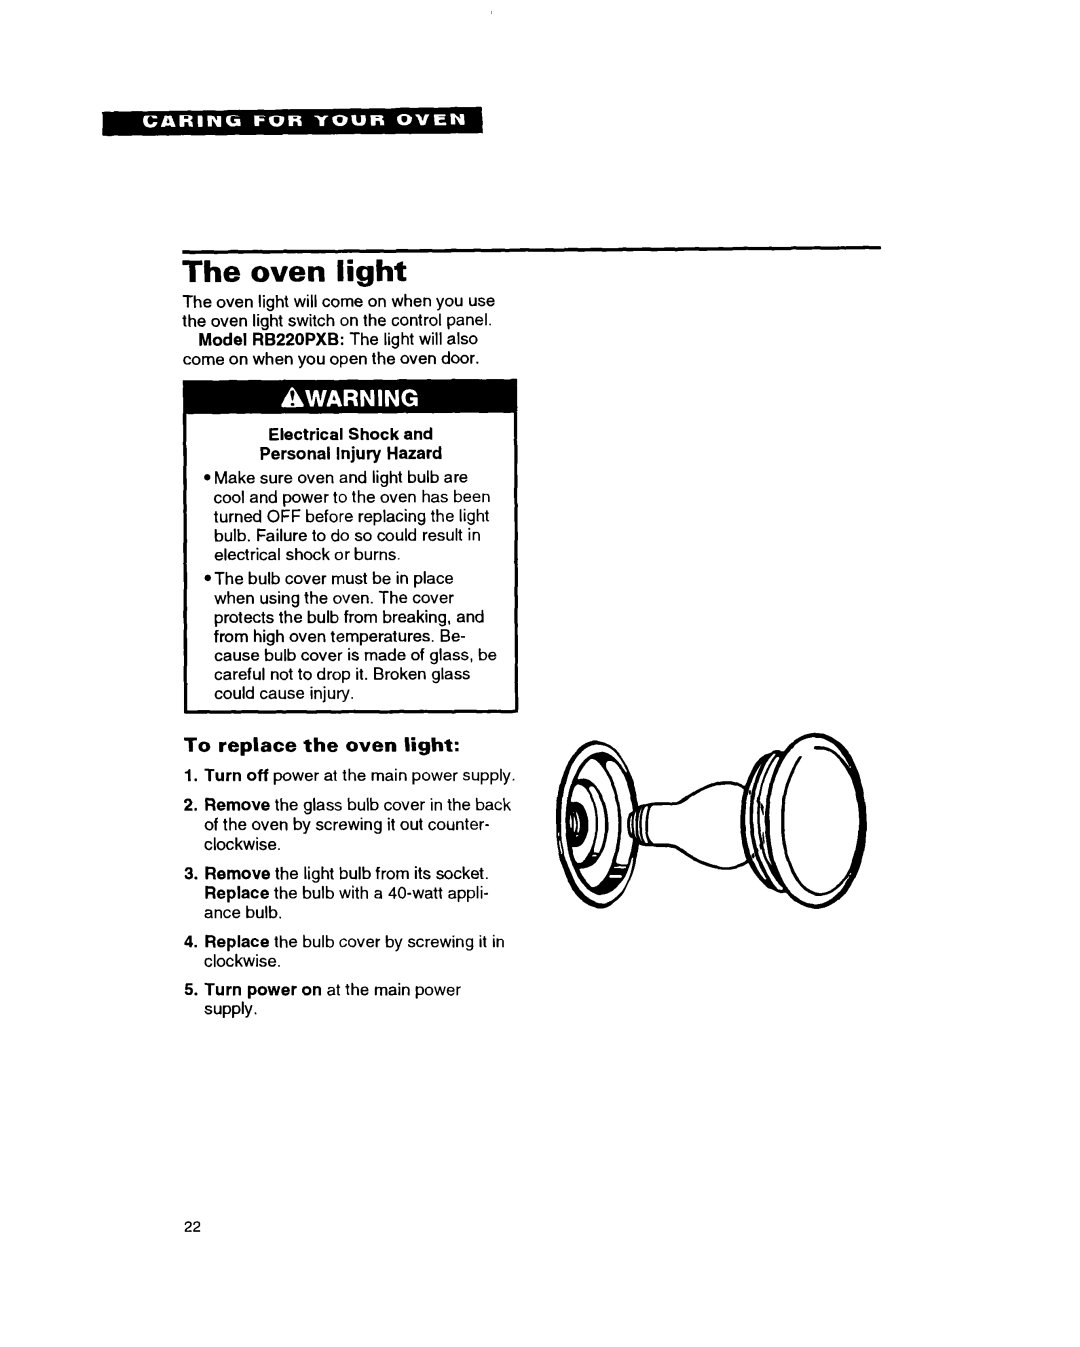 Whirlpool RB220PXB important safety instructions The oven light, To replace the oven light 